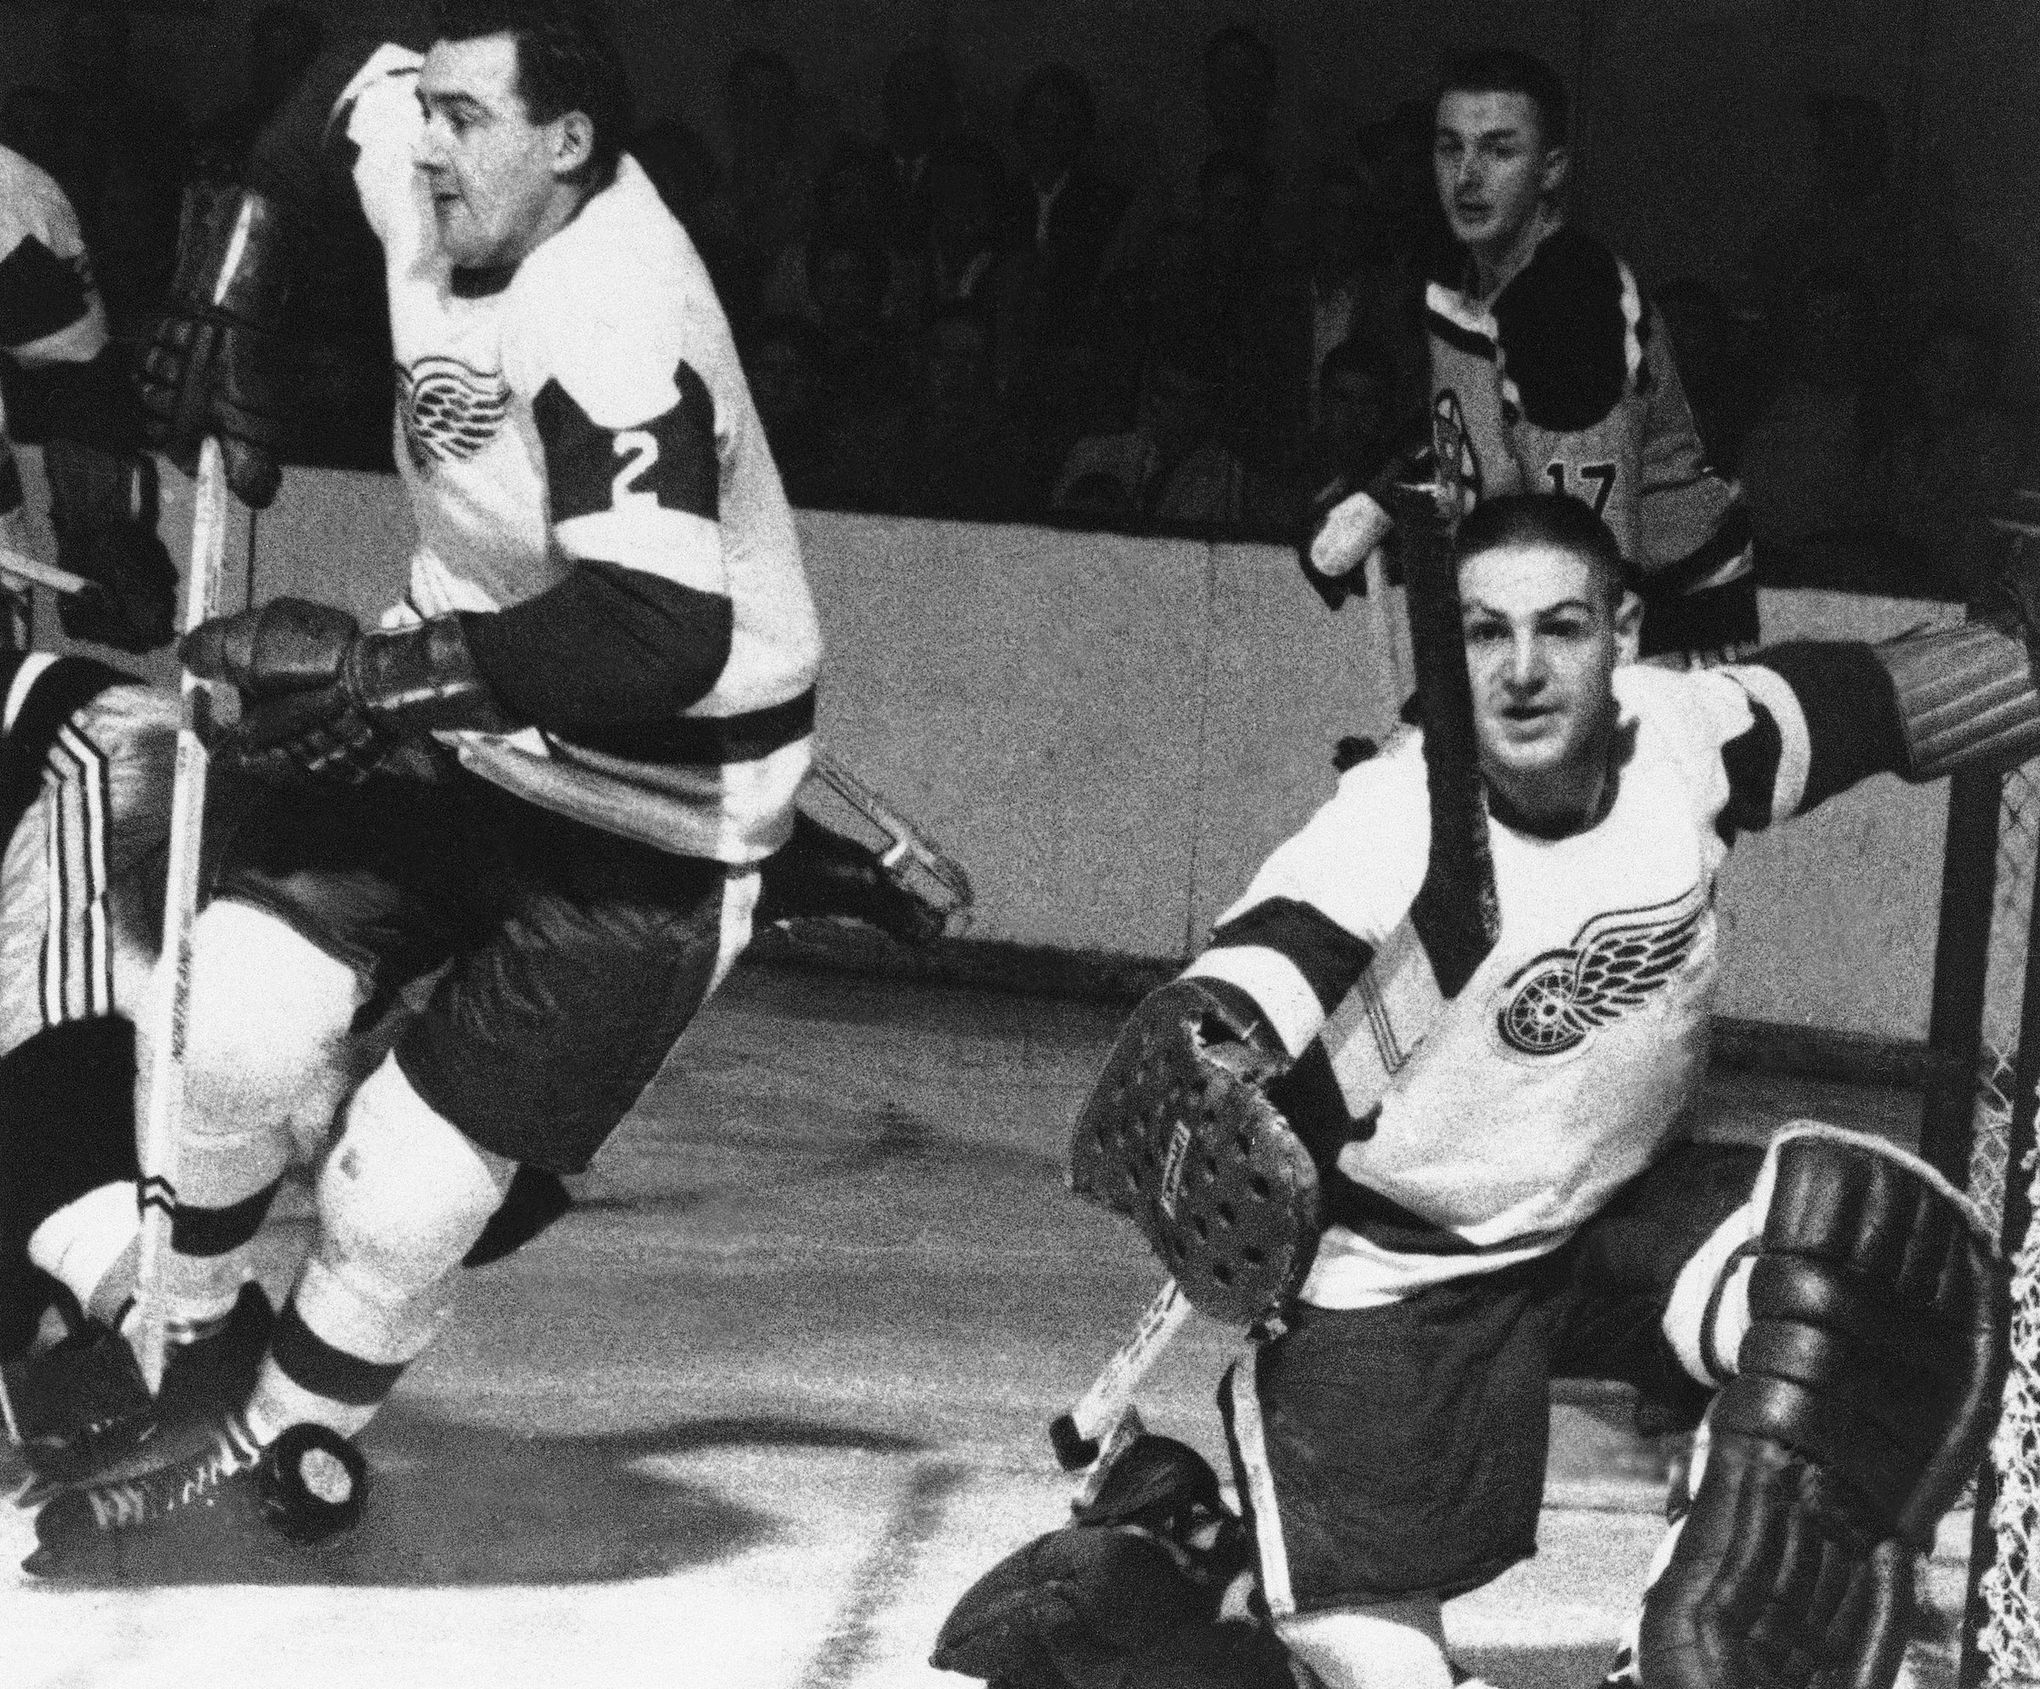 Terry Sawchuk film 'Goalie' traces triumphs and tragedy of hockey